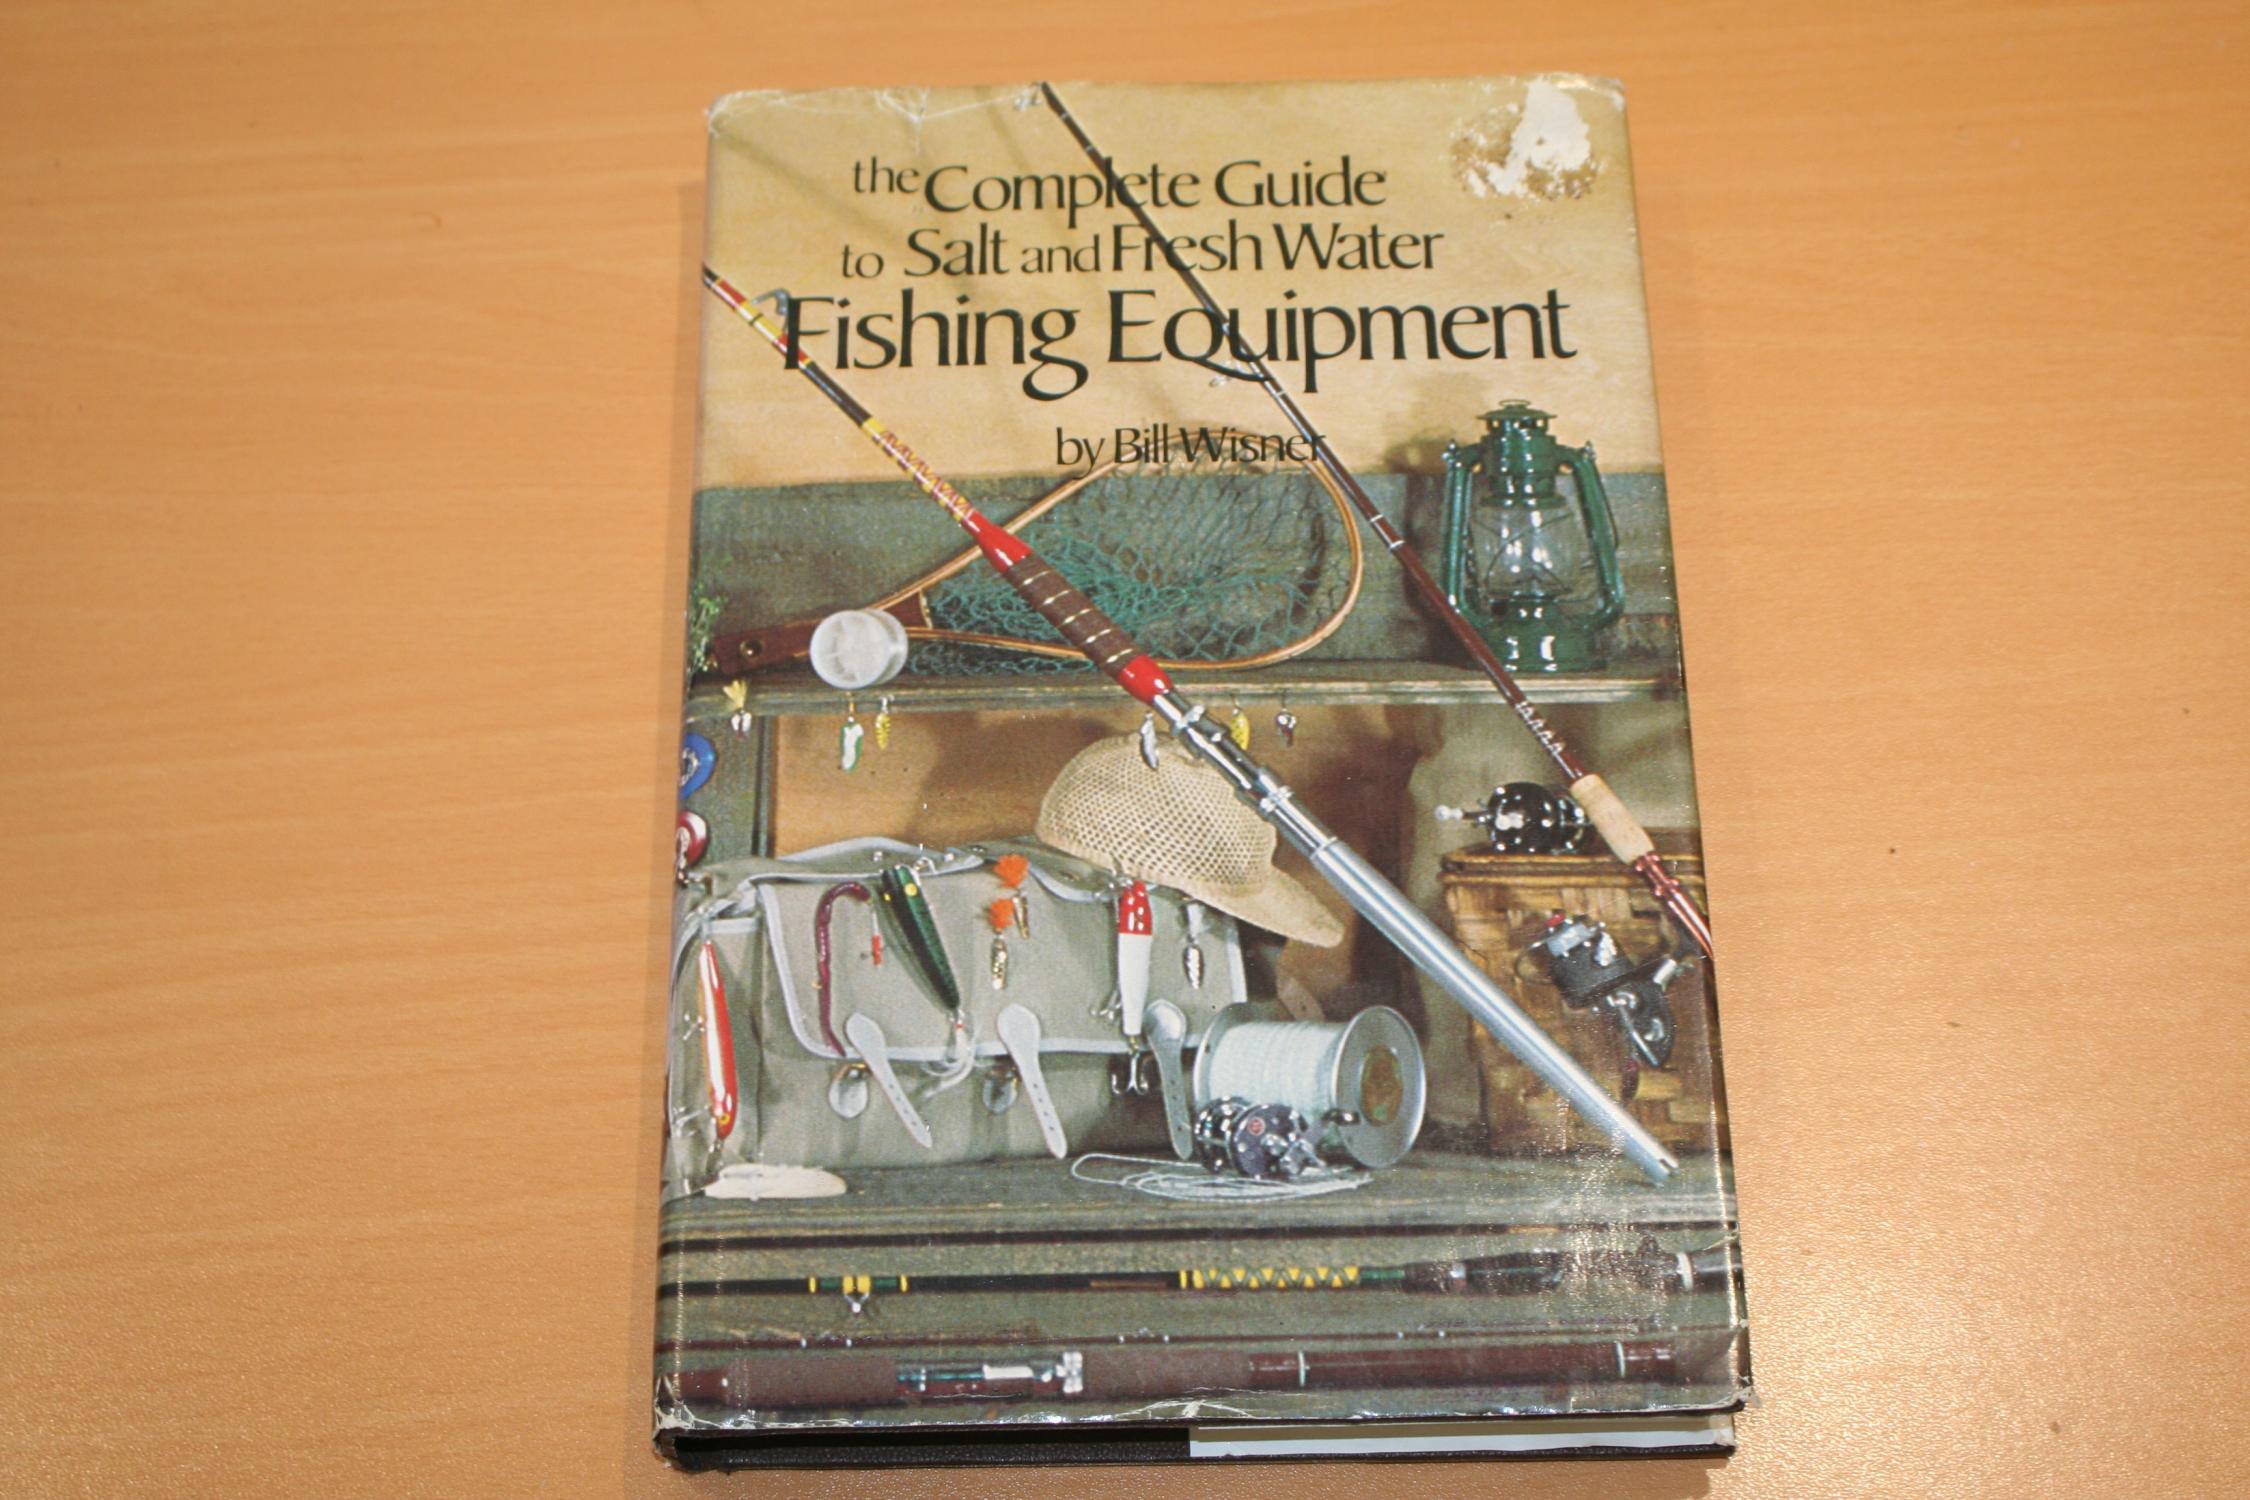 The Complete Guide to Salt and Fresh Water Fishing Equipment by